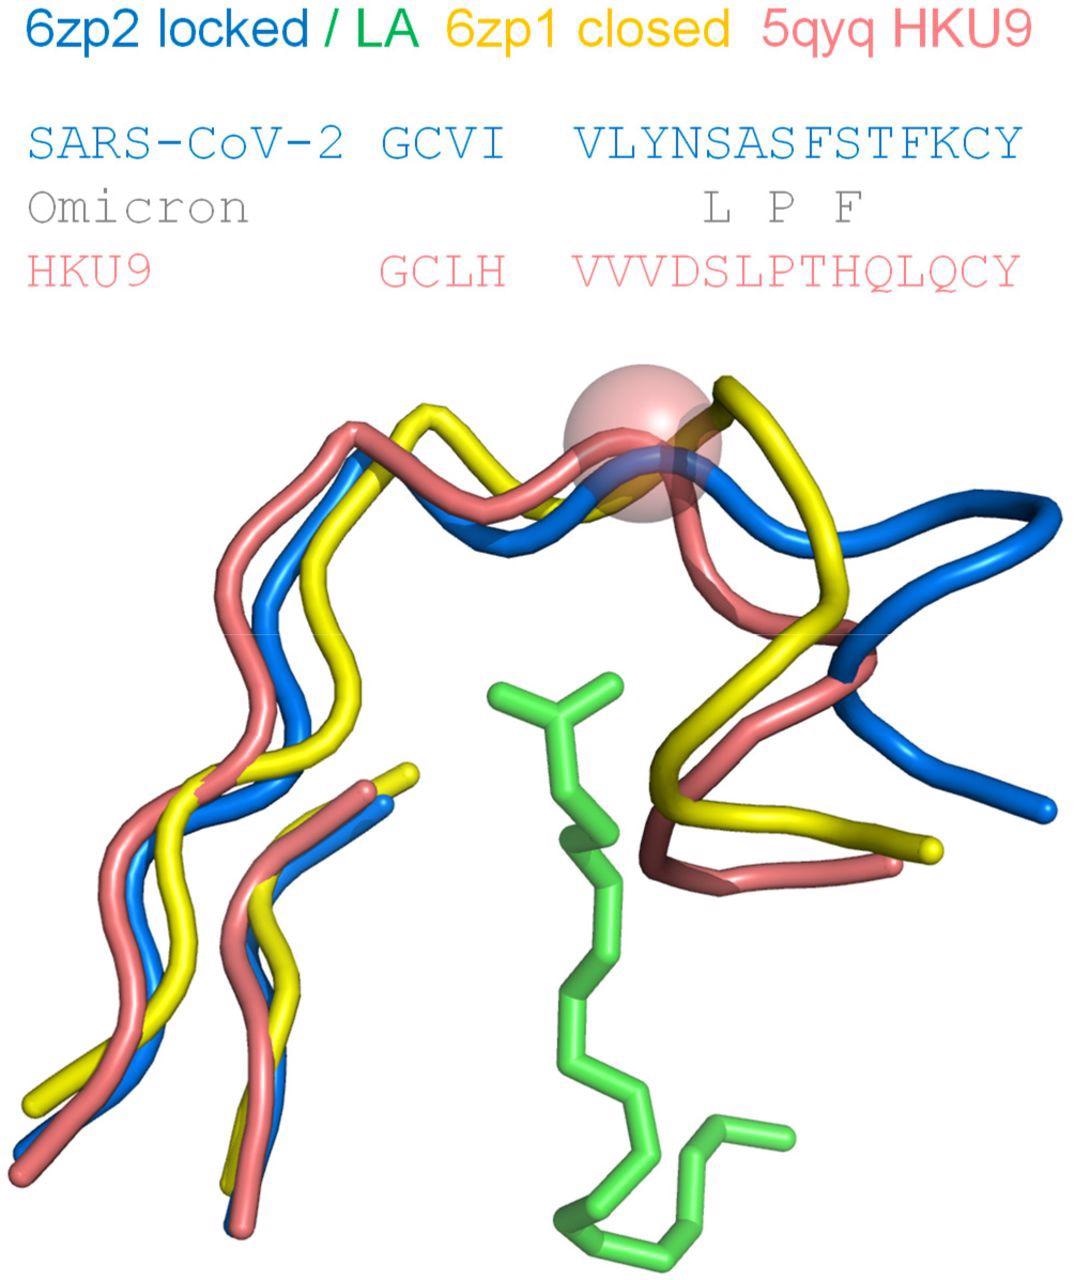 Proline in the RBD of coronavirus HKU9, a site equivalent to S373 in the SARS-CoV-2 RBD, exhibits a kink in the mainchain. Regions around the LA binding site of SARS-CoV-2 S protein RBD are shown for locked (6zp2) and closed (6zp1) structures, with LA from 6zp2. The β-strand elements align well structurally, whereas the difference in pocket gating structures between pocket open/occupied (6zp2) and closed/unoccupied (6zp1) is clear in the turn region at the right hand side. A proline in the RBD of bat-derived coronavirus HKU9 (Huang et al., 2016), at the equivalent location to S373 of SARS-CoV-2 S protein, is indicated with a sphere at the Cα added to its tube mainchain. Amino acid sequences are shown for the contiguous turn-strand, with changes in the SARS-CoV-2 Omicron variant added.